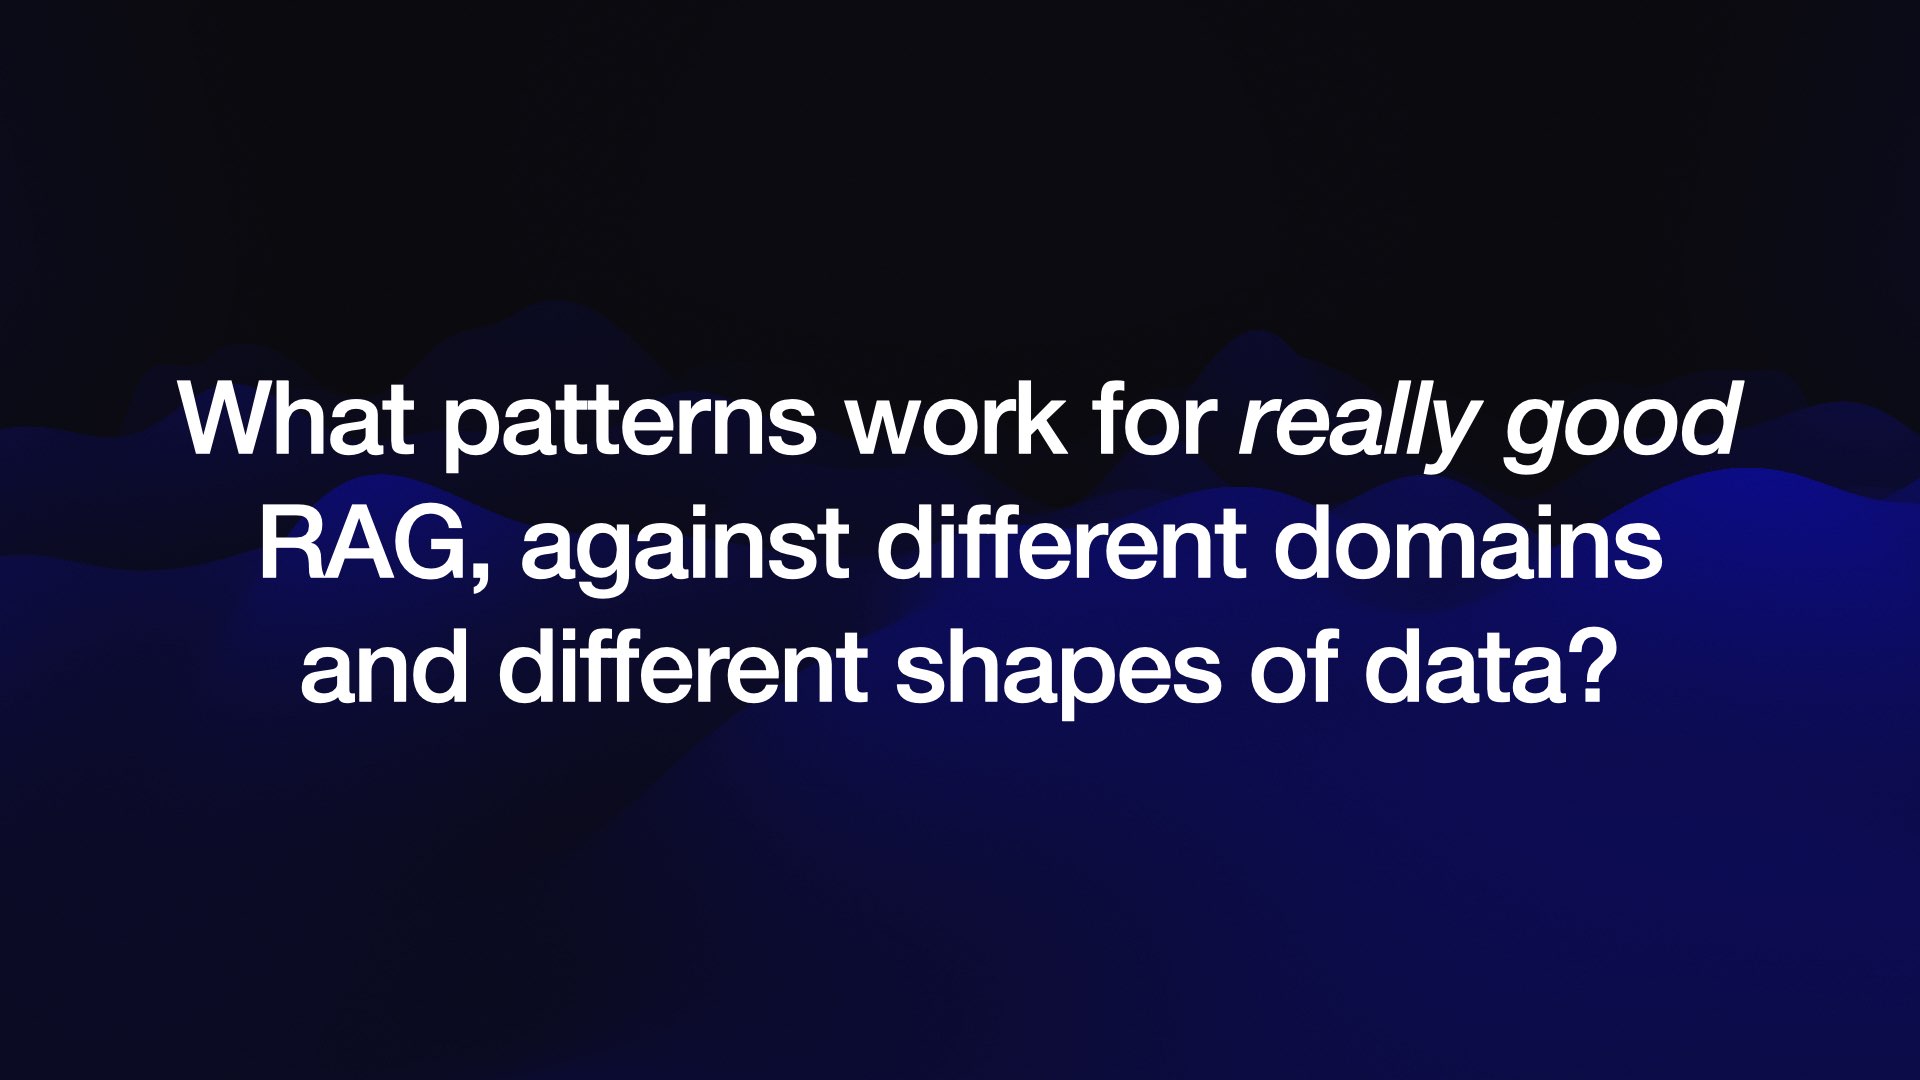 What patterns work for really good RAG, against different domains and different shapes of data?